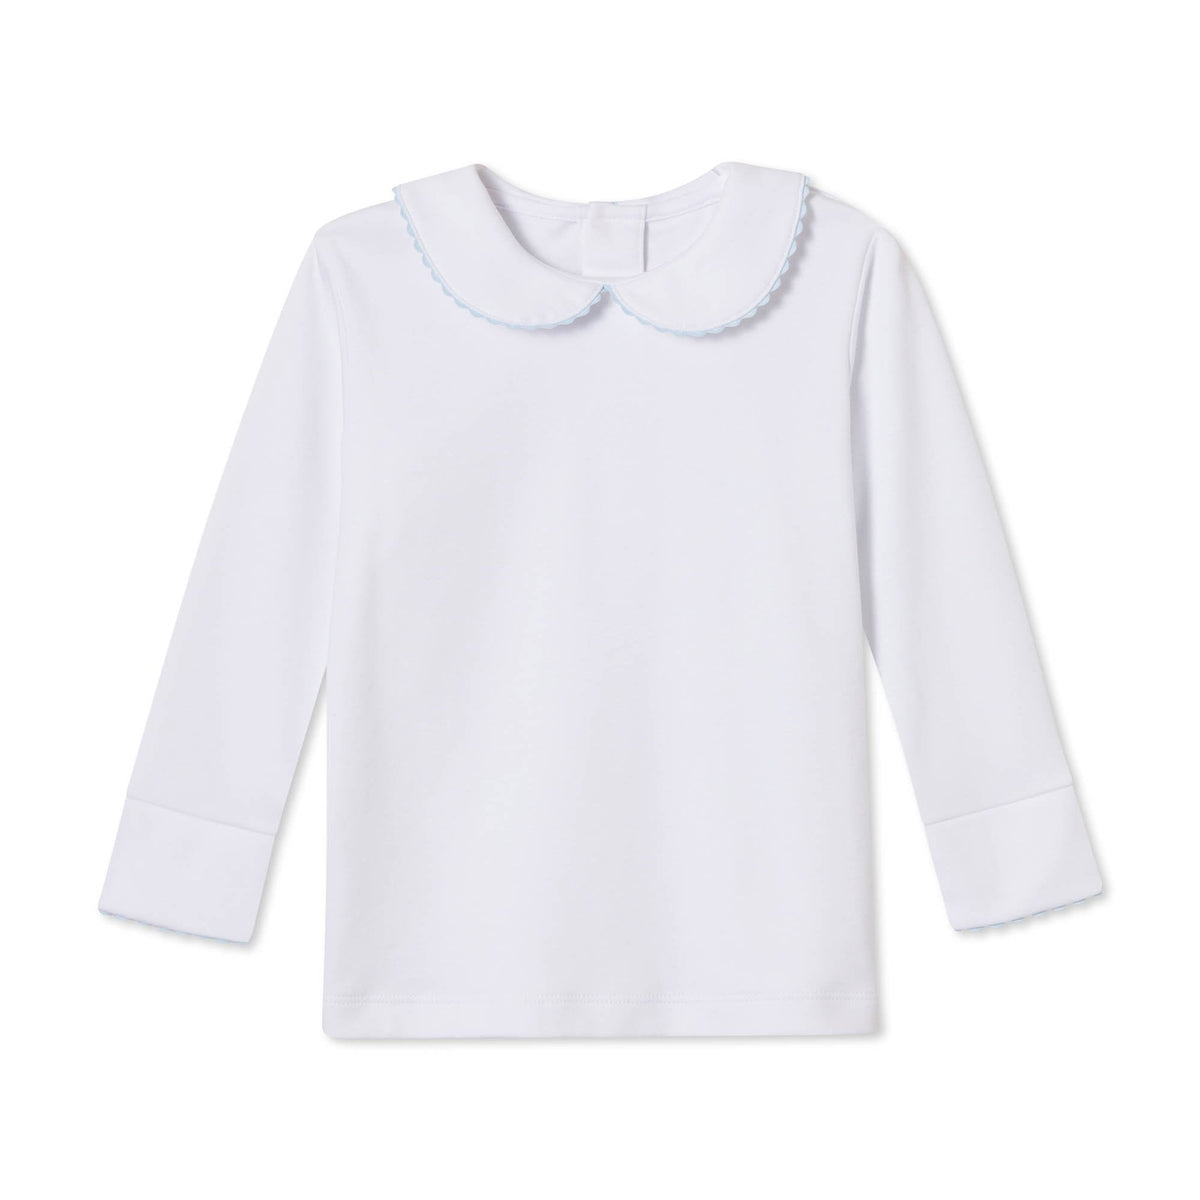 Classic and Preppy Isabelle Long Sleeve Peter Pan Shirt, Nantucket Breeze Ric Rac-Shirts and Tops-Bright White with Nantucket Breeze Ric Rac-2T-CPC - Classic Prep Childrenswear